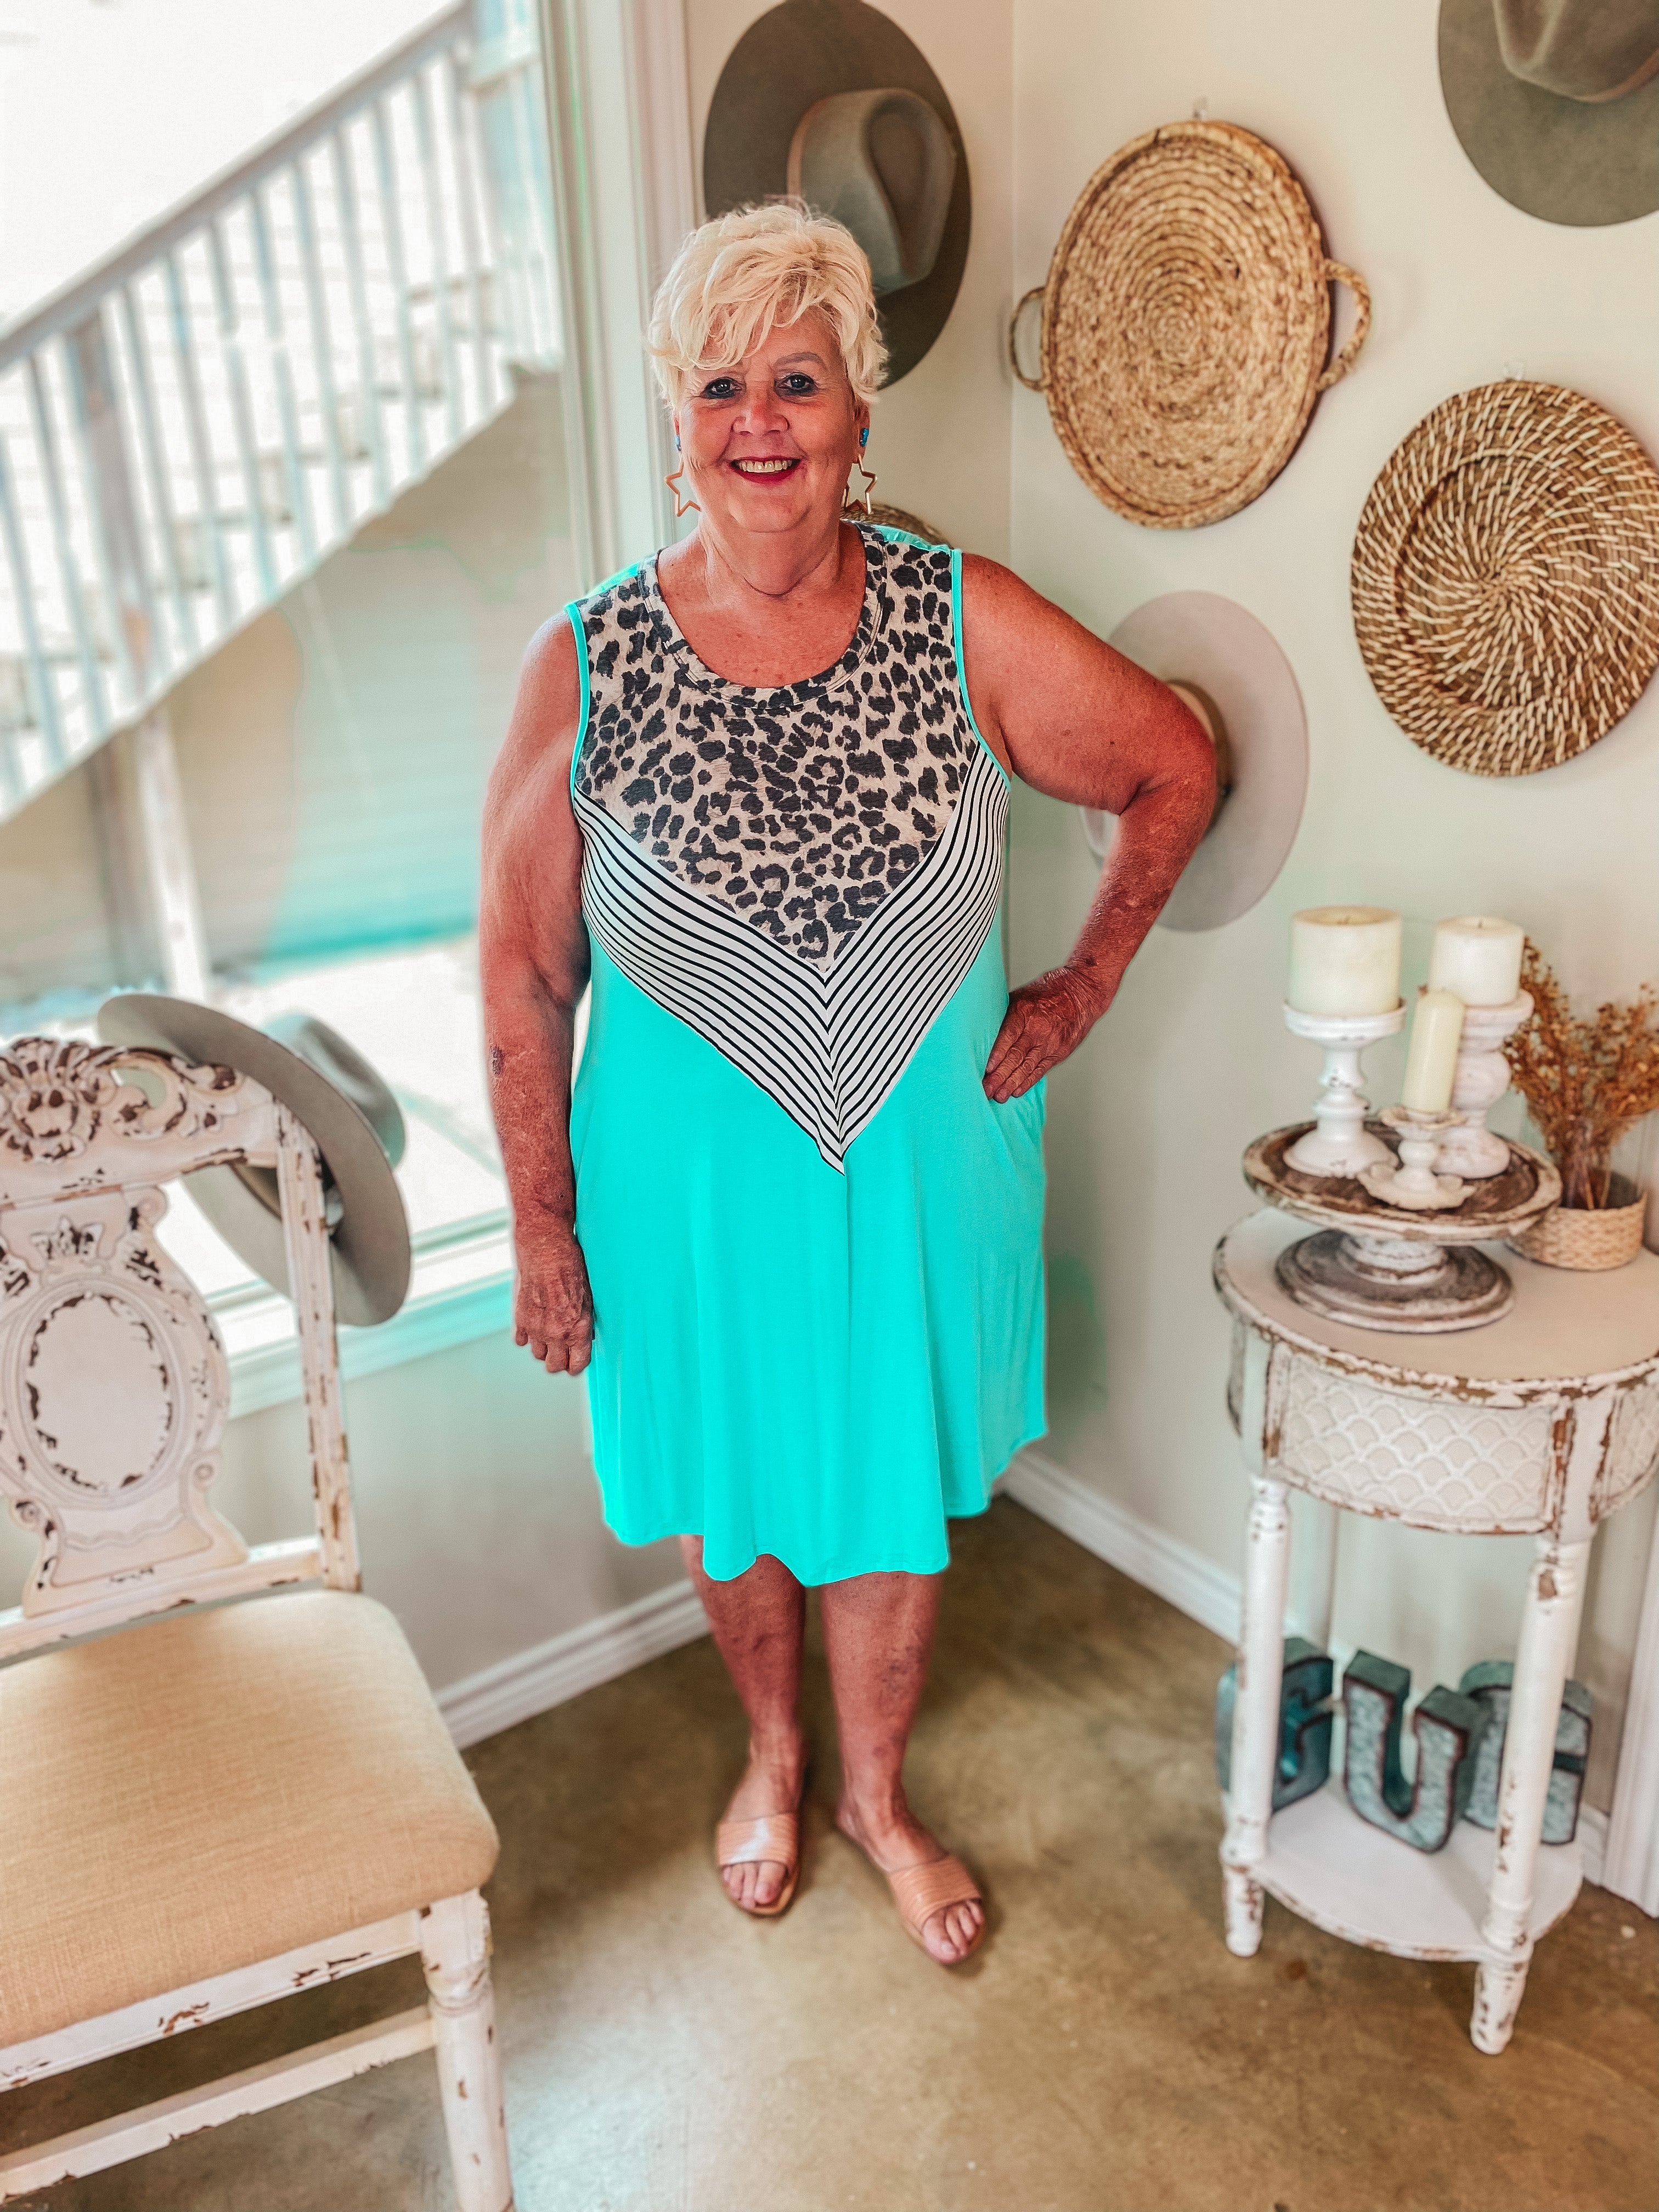 Pretty in Prints Leopard and Striped Tank Top Dress in Mint - Giddy Up Glamour Boutique